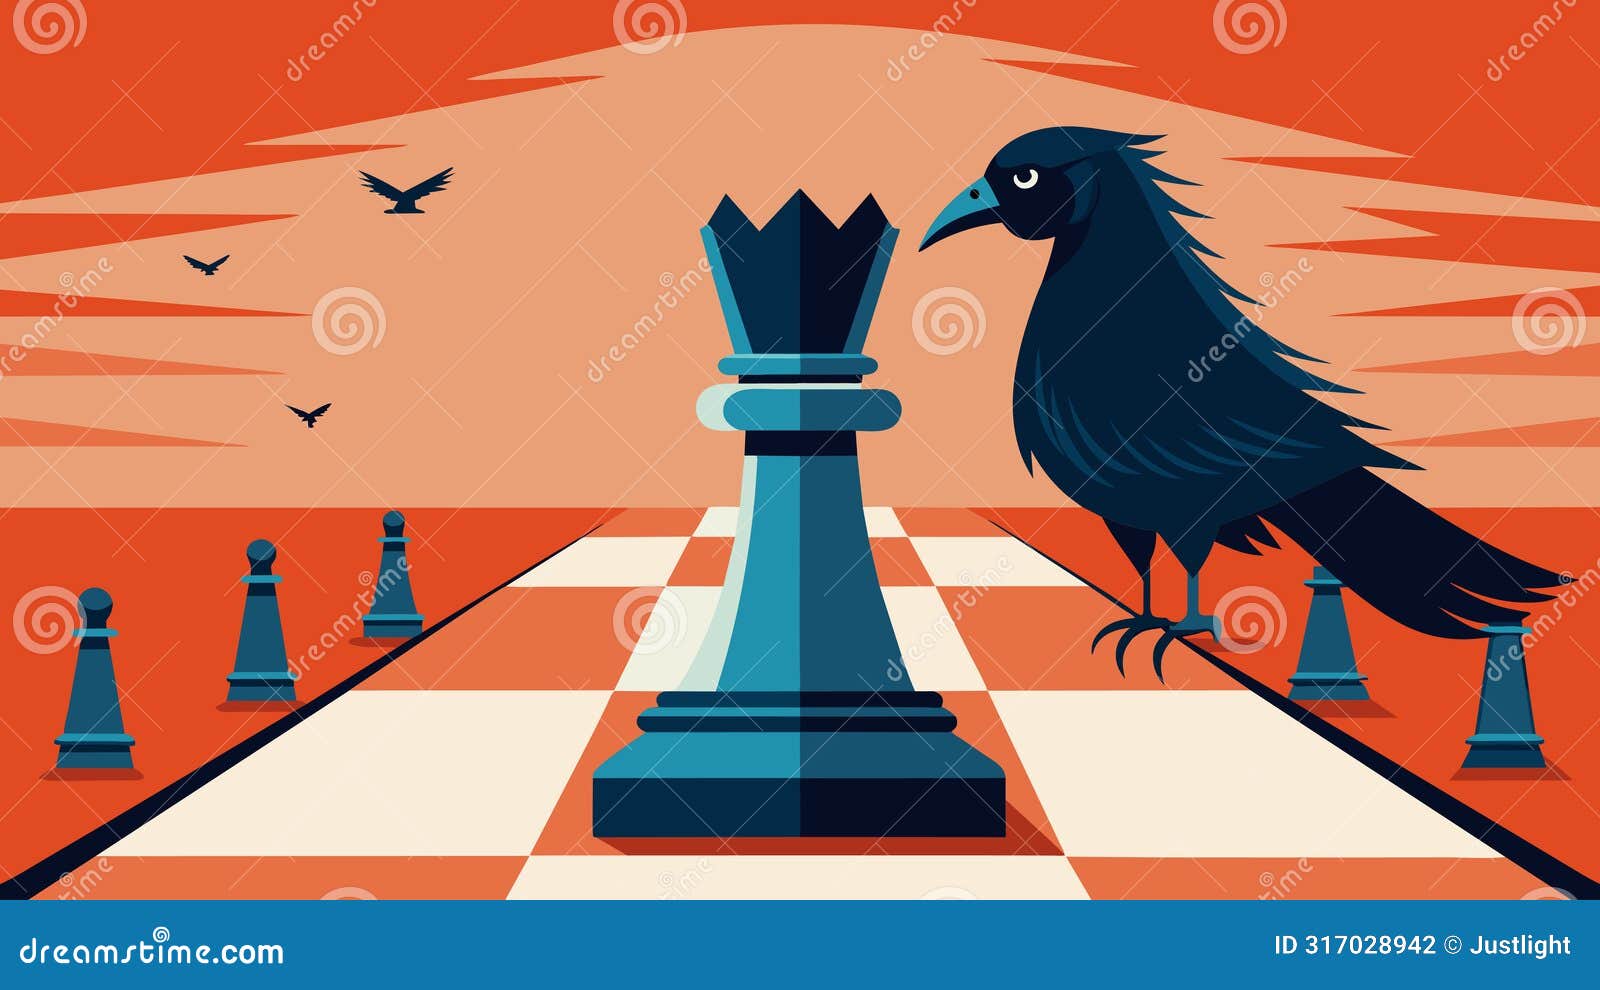 the rook moving odically across the board izes the meticulous planning and foresight required in political